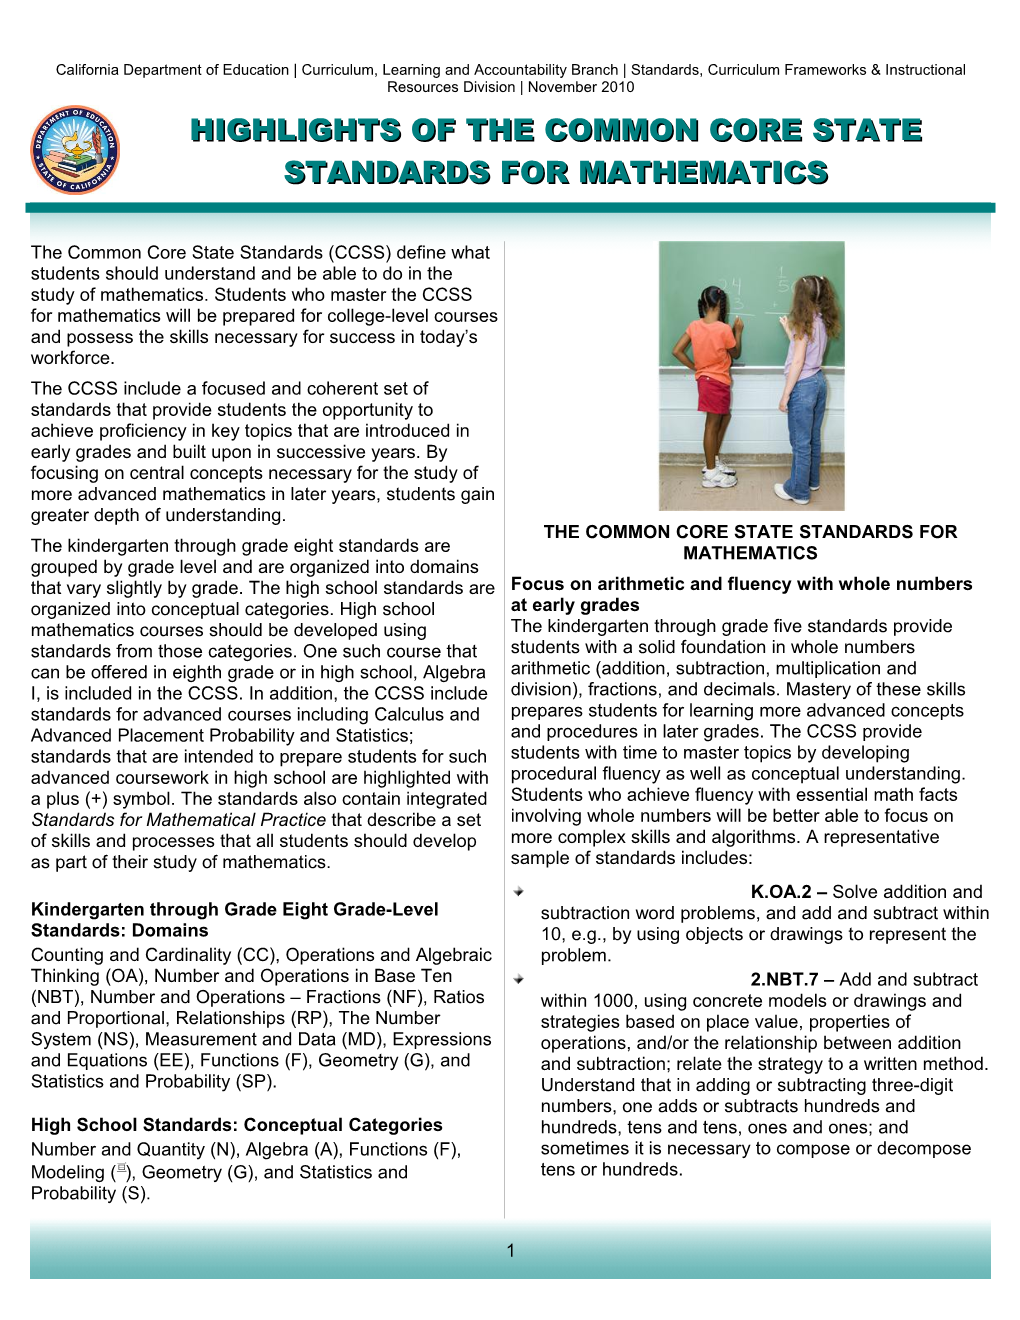 Highlights for Math - CCSS Resources (CA Dept of Education)